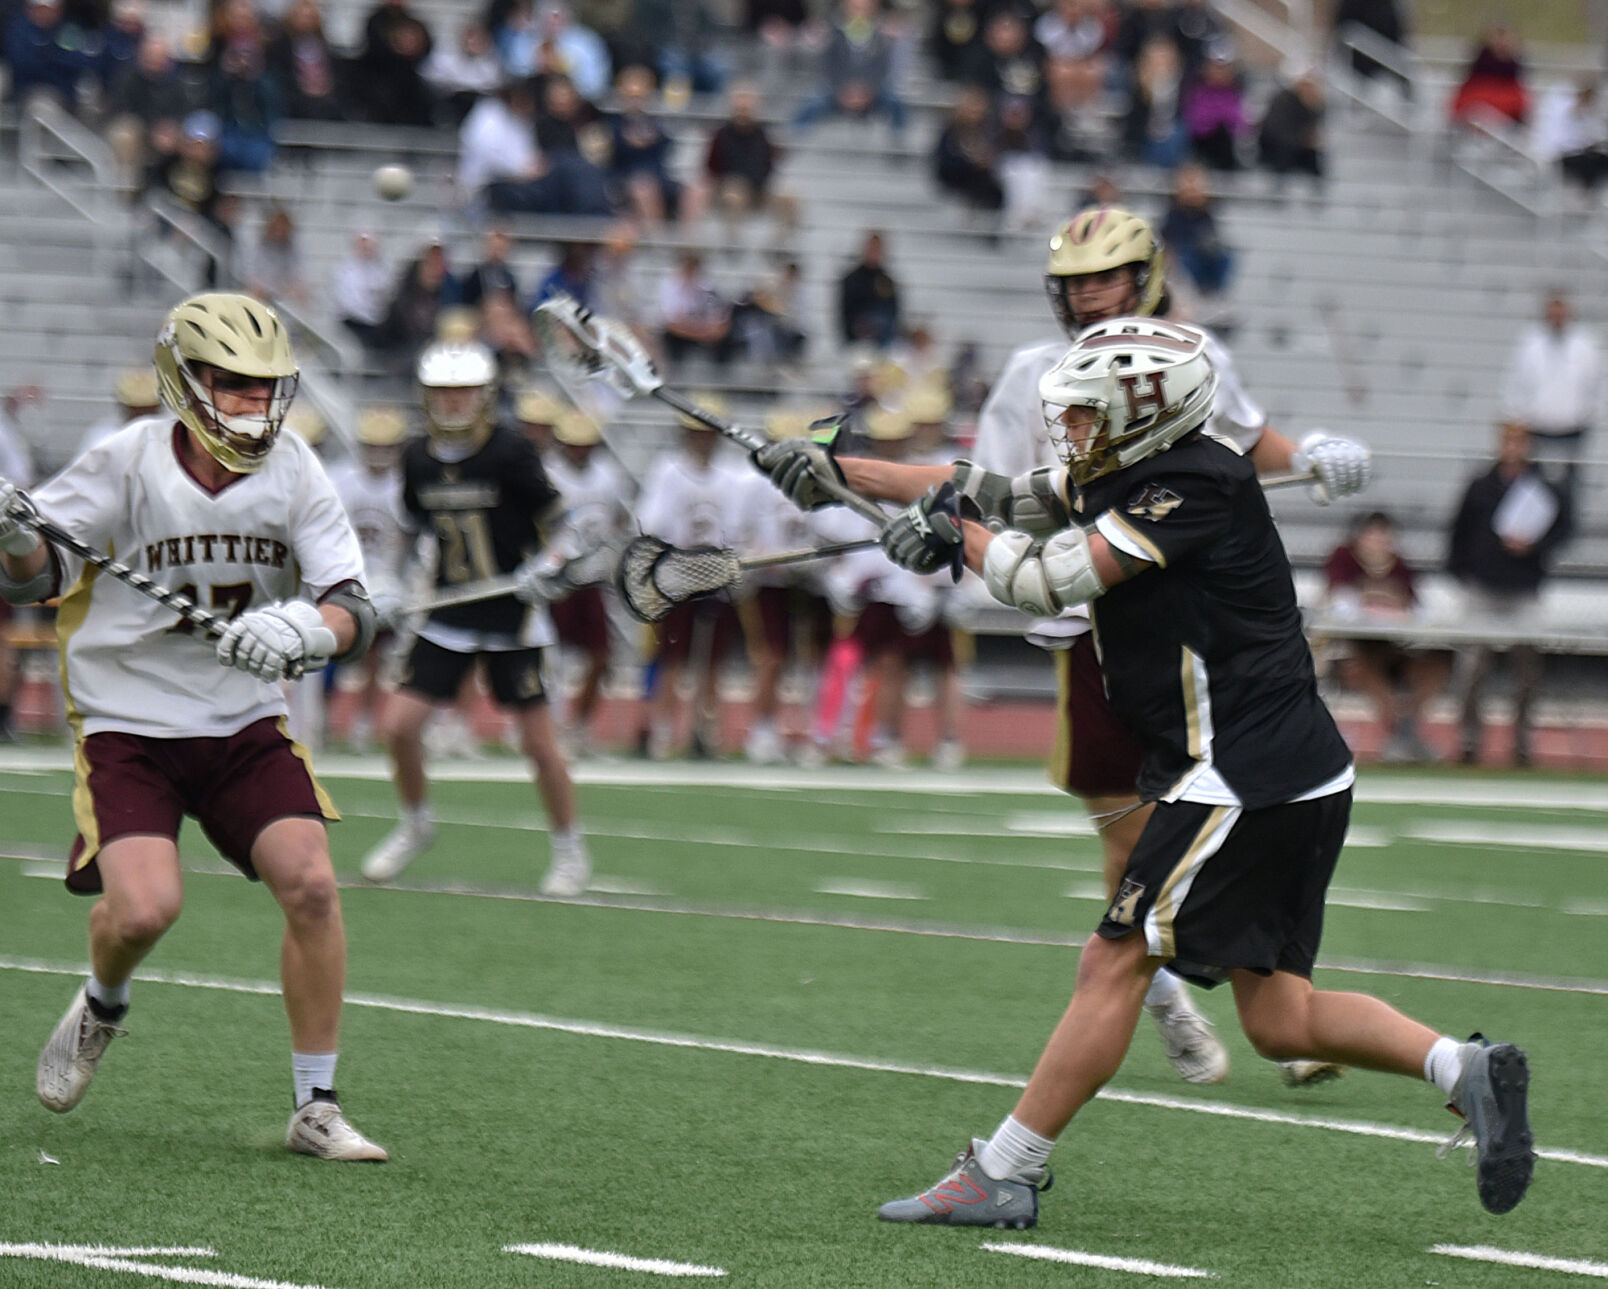 Haverhill High Lacrosse Makes History with Victory Over Whittier; Strong Start for Hillies